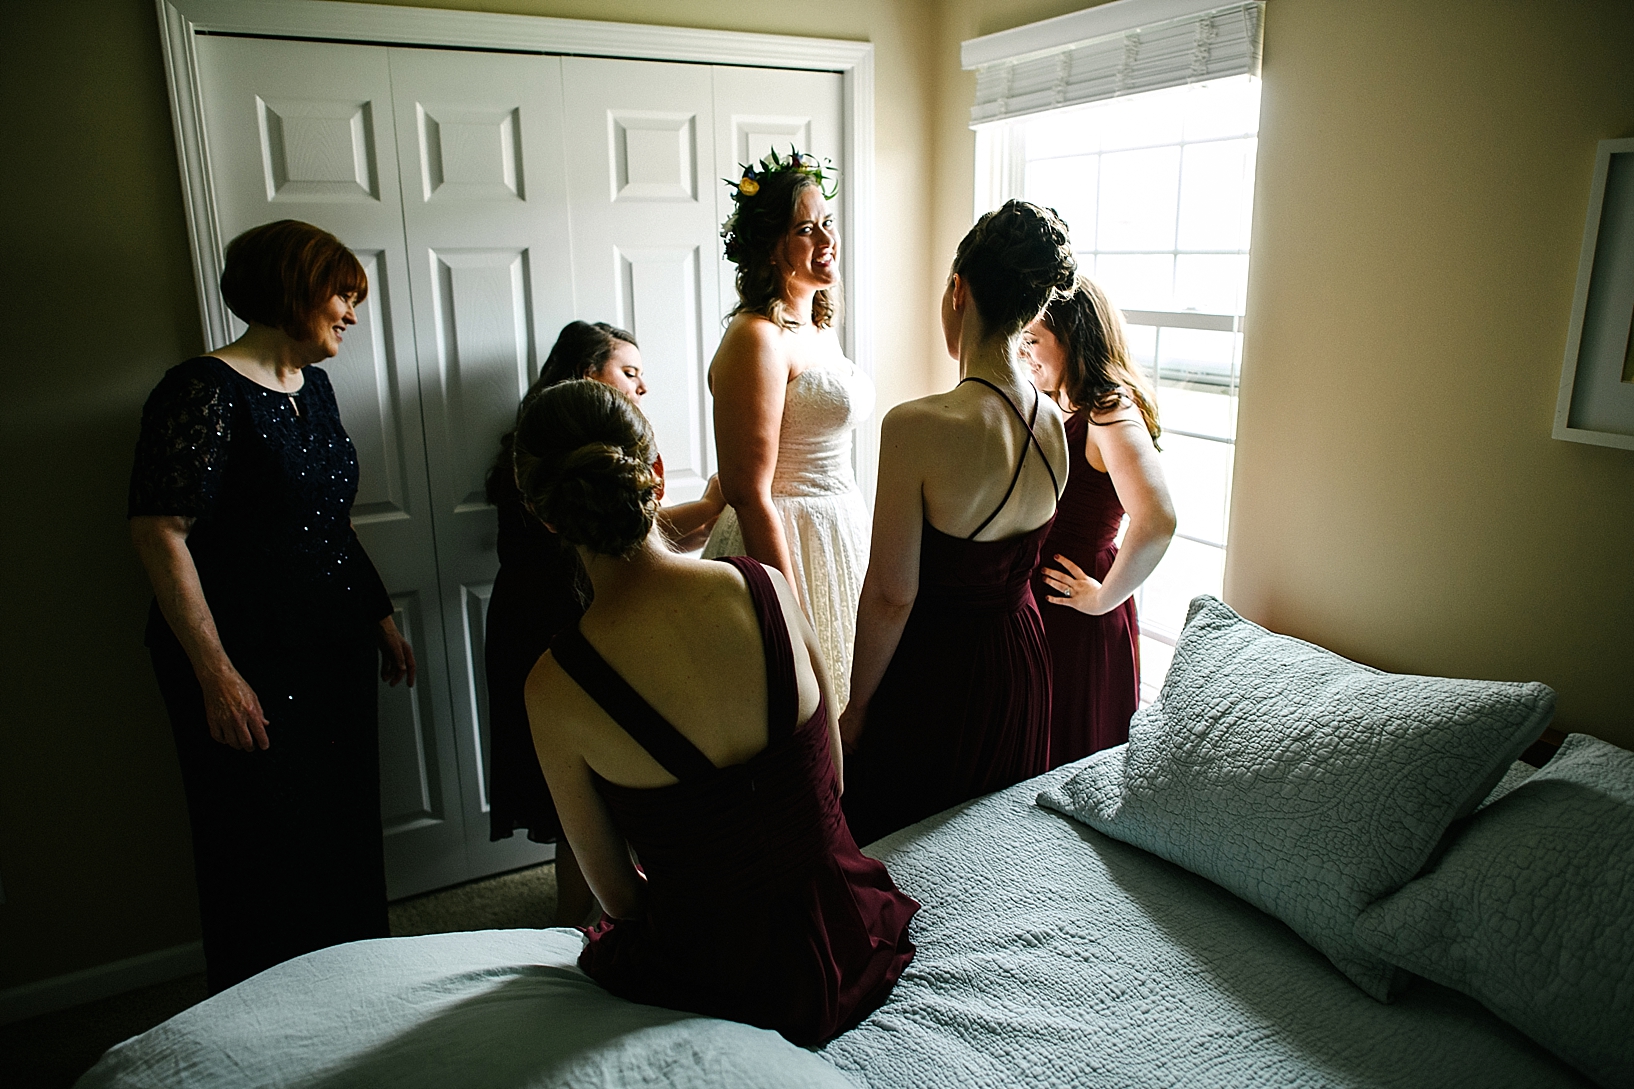 bridesmaids helping bride into her gown